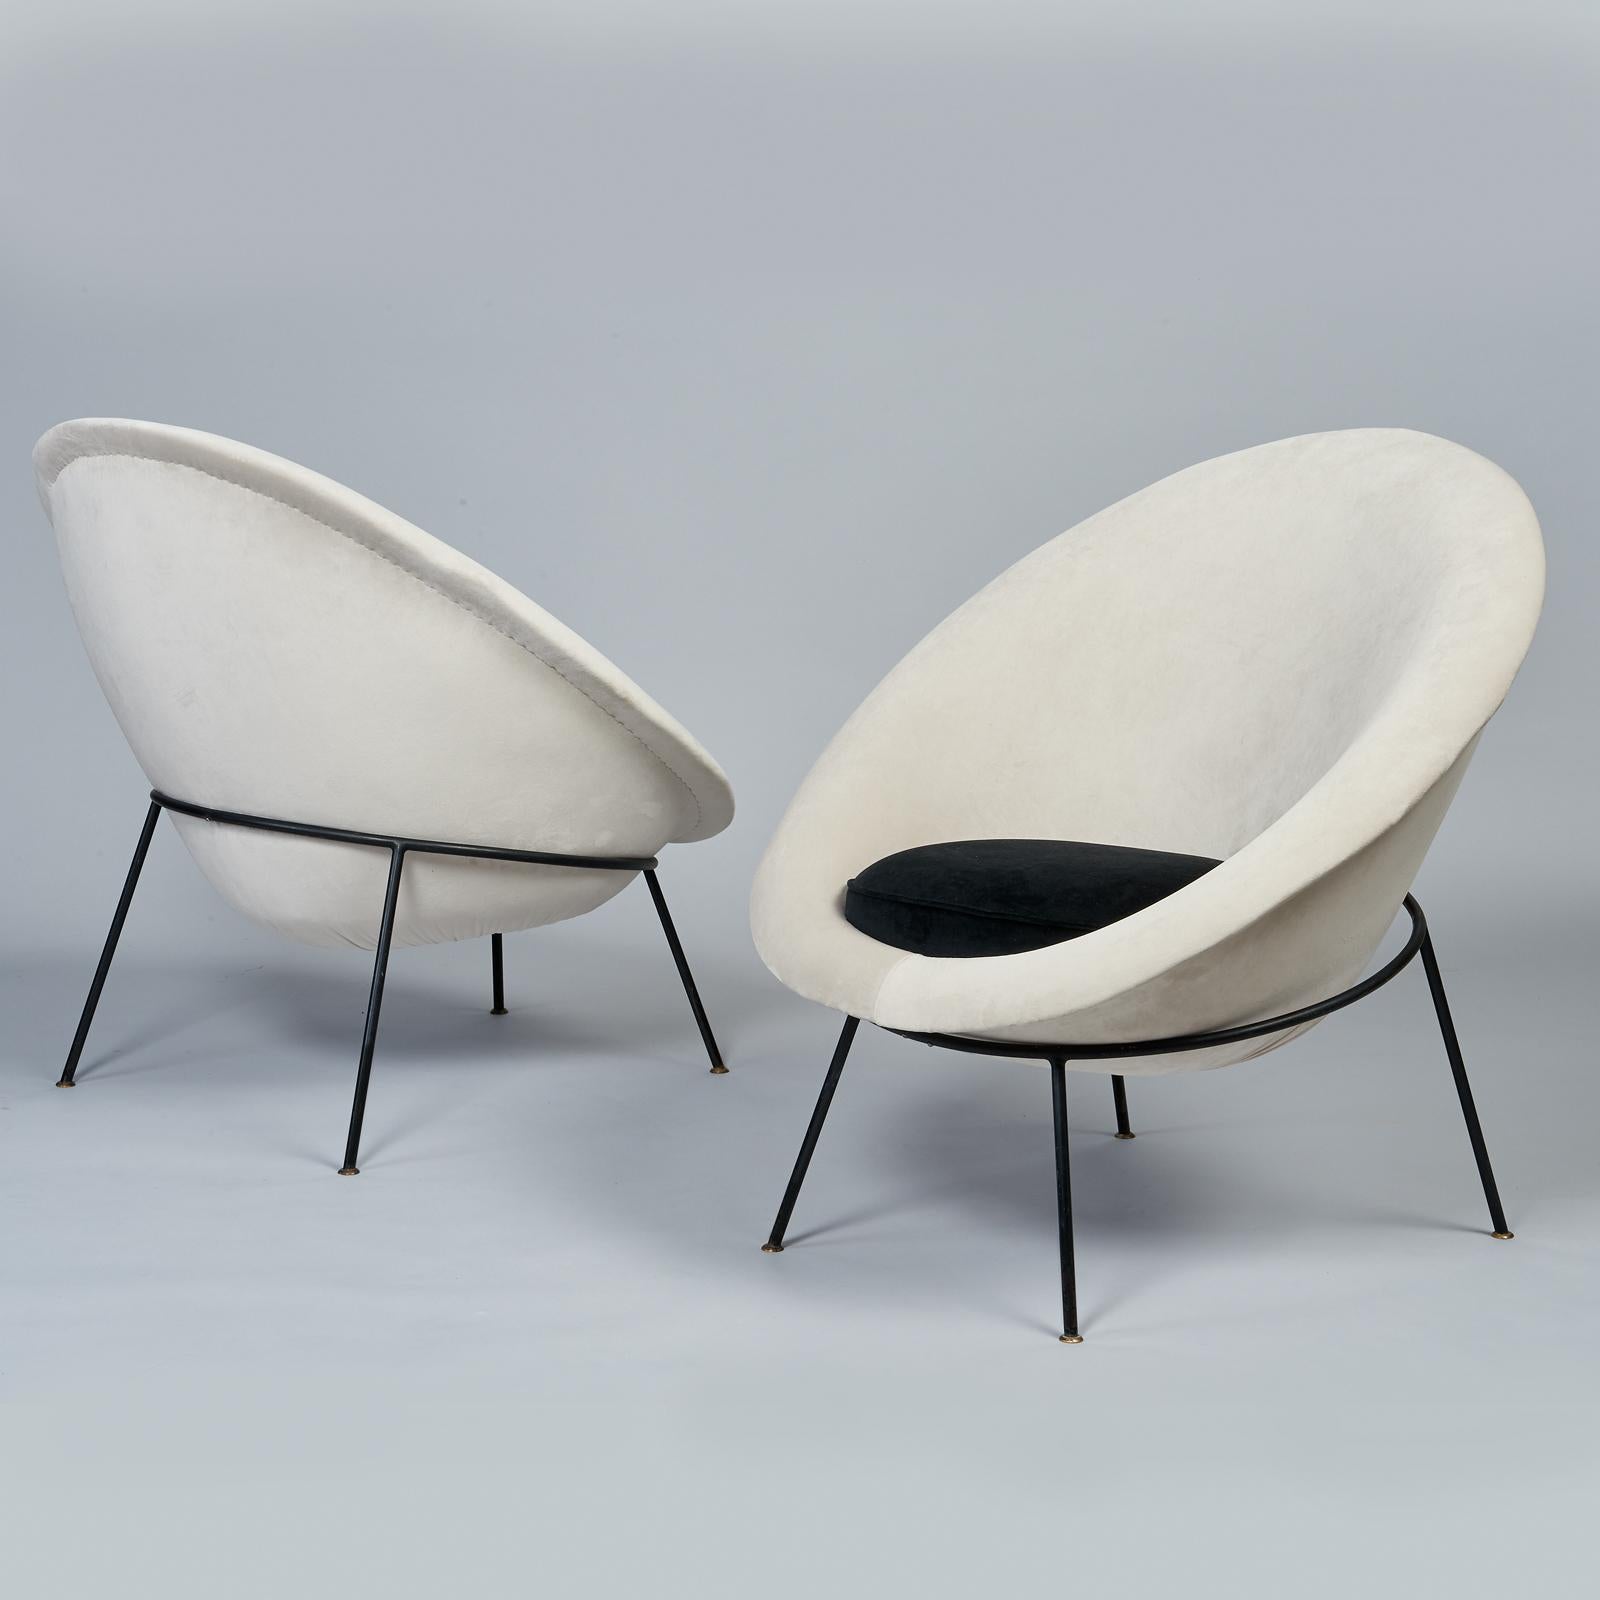 Italian Pair of Egg Chairs by Ariberto Colombo in Velvet & Lacquered Metal, Italy 1950's